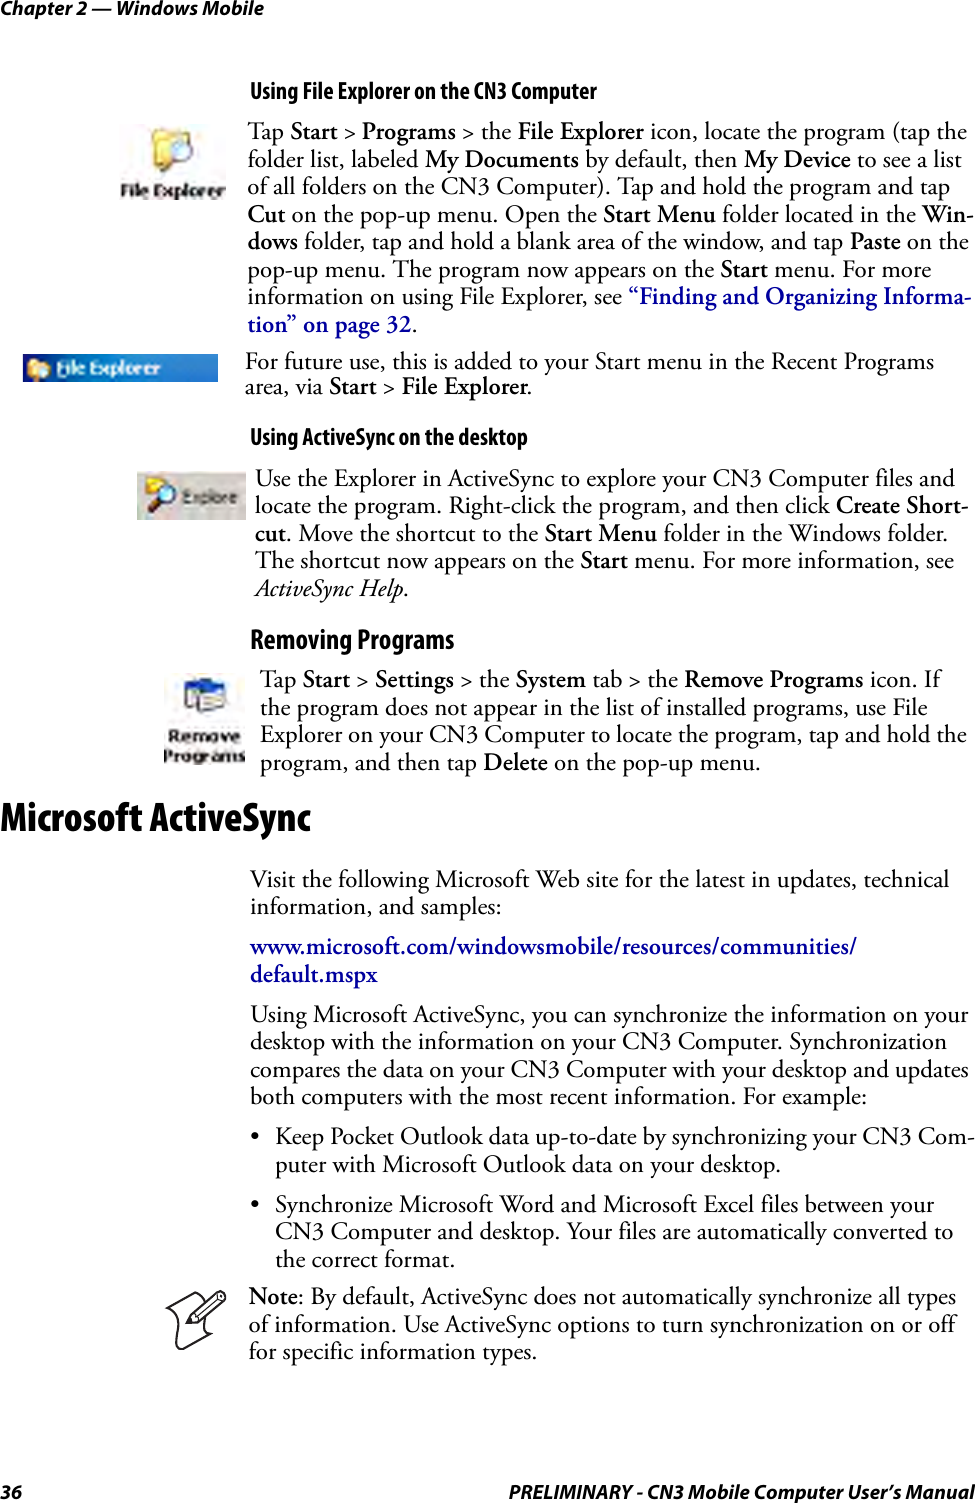 Chapter 2 — Windows Mobile36 PRELIMINARY - CN3 Mobile Computer User’s ManualUsing File Explorer on the CN3 ComputerUsing ActiveSync on the desktopRemoving ProgramsMicrosoft ActiveSyncVisit the following Microsoft Web site for the latest in updates, technical information, and samples:www.microsoft.com/windowsmobile/resources/communities/default.mspxUsing Microsoft ActiveSync, you can synchronize the information on your desktop with the information on your CN3 Computer. Synchronization compares the data on your CN3 Computer with your desktop and updates both computers with the most recent information. For example:• Keep Pocket Outlook data up-to-date by synchronizing your CN3 Com-puter with Microsoft Outlook data on your desktop.• Synchronize Microsoft Word and Microsoft Excel files between your CN3 Computer and desktop. Your files are automatically converted to the correct format.Tap Start &gt; Programs &gt; the File Explorer icon, locate the program (tap the folder list, labeled My Documents by default, then My Device to see a list of all folders on the CN3 Computer). Tap and hold the program and tap Cut on the pop-up menu. Open the Start Menu folder located in the Win-dows folder, tap and hold a blank area of the window, and tap Paste on the pop-up menu. The program now appears on the Start menu. For more information on using File Explorer, see “Finding and Organizing Informa-tion” on page 32.For future use, this is added to your Start menu in the Recent Programs area, via Start &gt; File Explorer.Use the Explorer in ActiveSync to explore your CN3 Computer files and locate the program. Right-click the program, and then click Create Short-cut. Move the shortcut to the Start Menu folder in the Windows folder. The shortcut now appears on the Start menu. For more information, see ActiveSync Help.Tap Start &gt; Settings &gt; the System tab &gt; the Remove Programs icon. If the program does not appear in the list of installed programs, use File Explorer on your CN3 Computer to locate the program, tap and hold the program, and then tap Delete on the pop-up menu.Note: By default, ActiveSync does not automatically synchronize all types of information. Use ActiveSync options to turn synchronization on or off for specific information types.